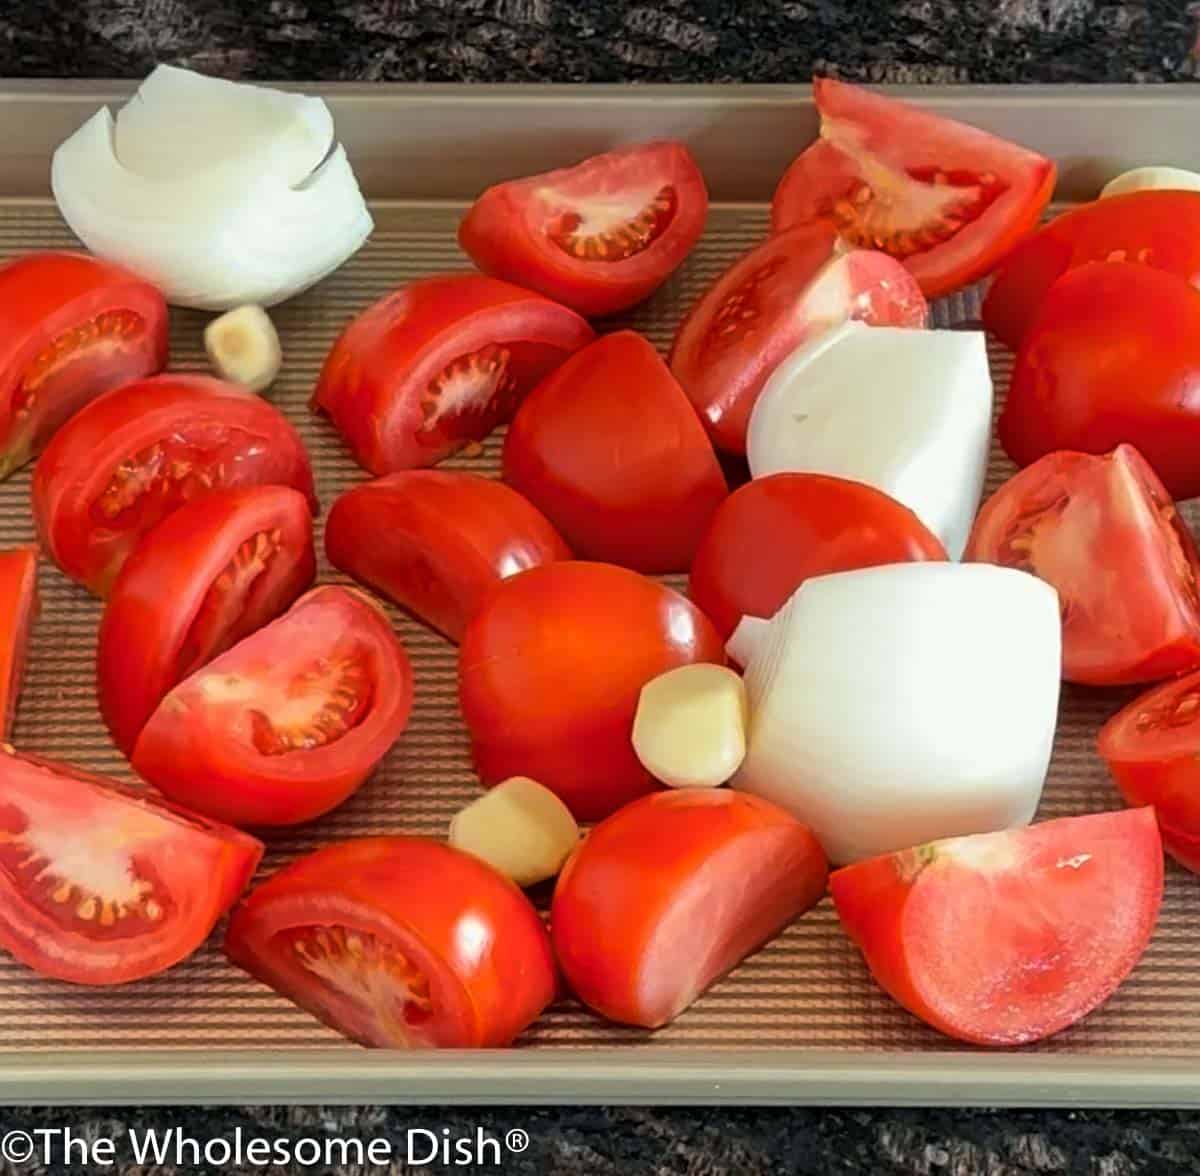 Tomatoes, onion, and garlic cloves on a baking sheet.